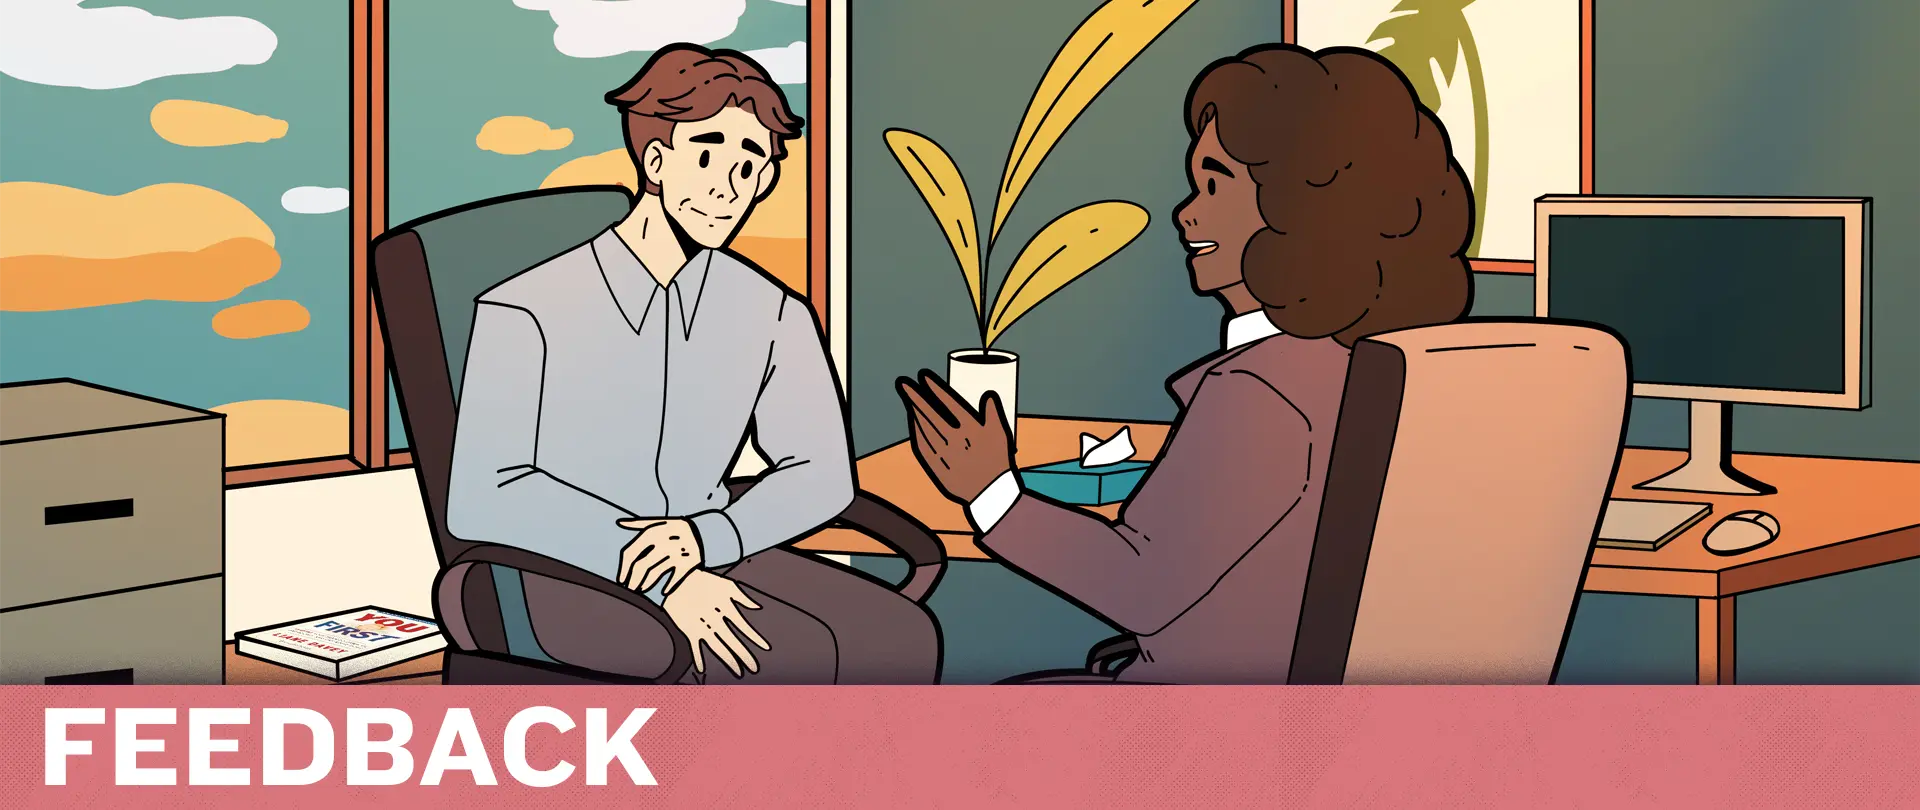 Illustration of a person giving feedback while the other person listens intently